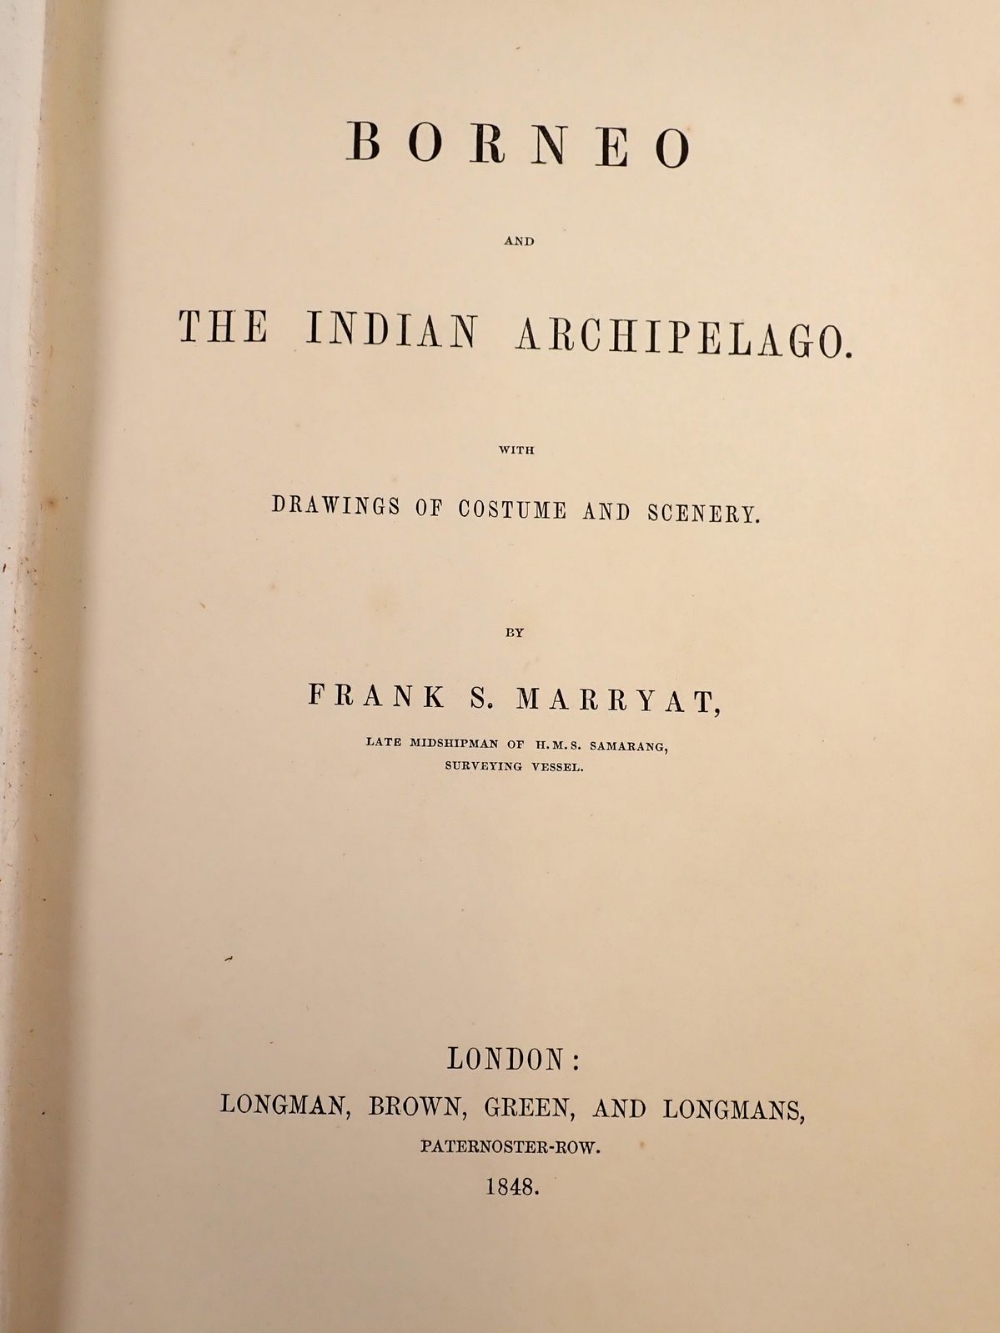 Borneo and The Indian Archipelago by Frank S Marryat, published Longman Brown, Green & Longmans 1848 - Image 3 of 4